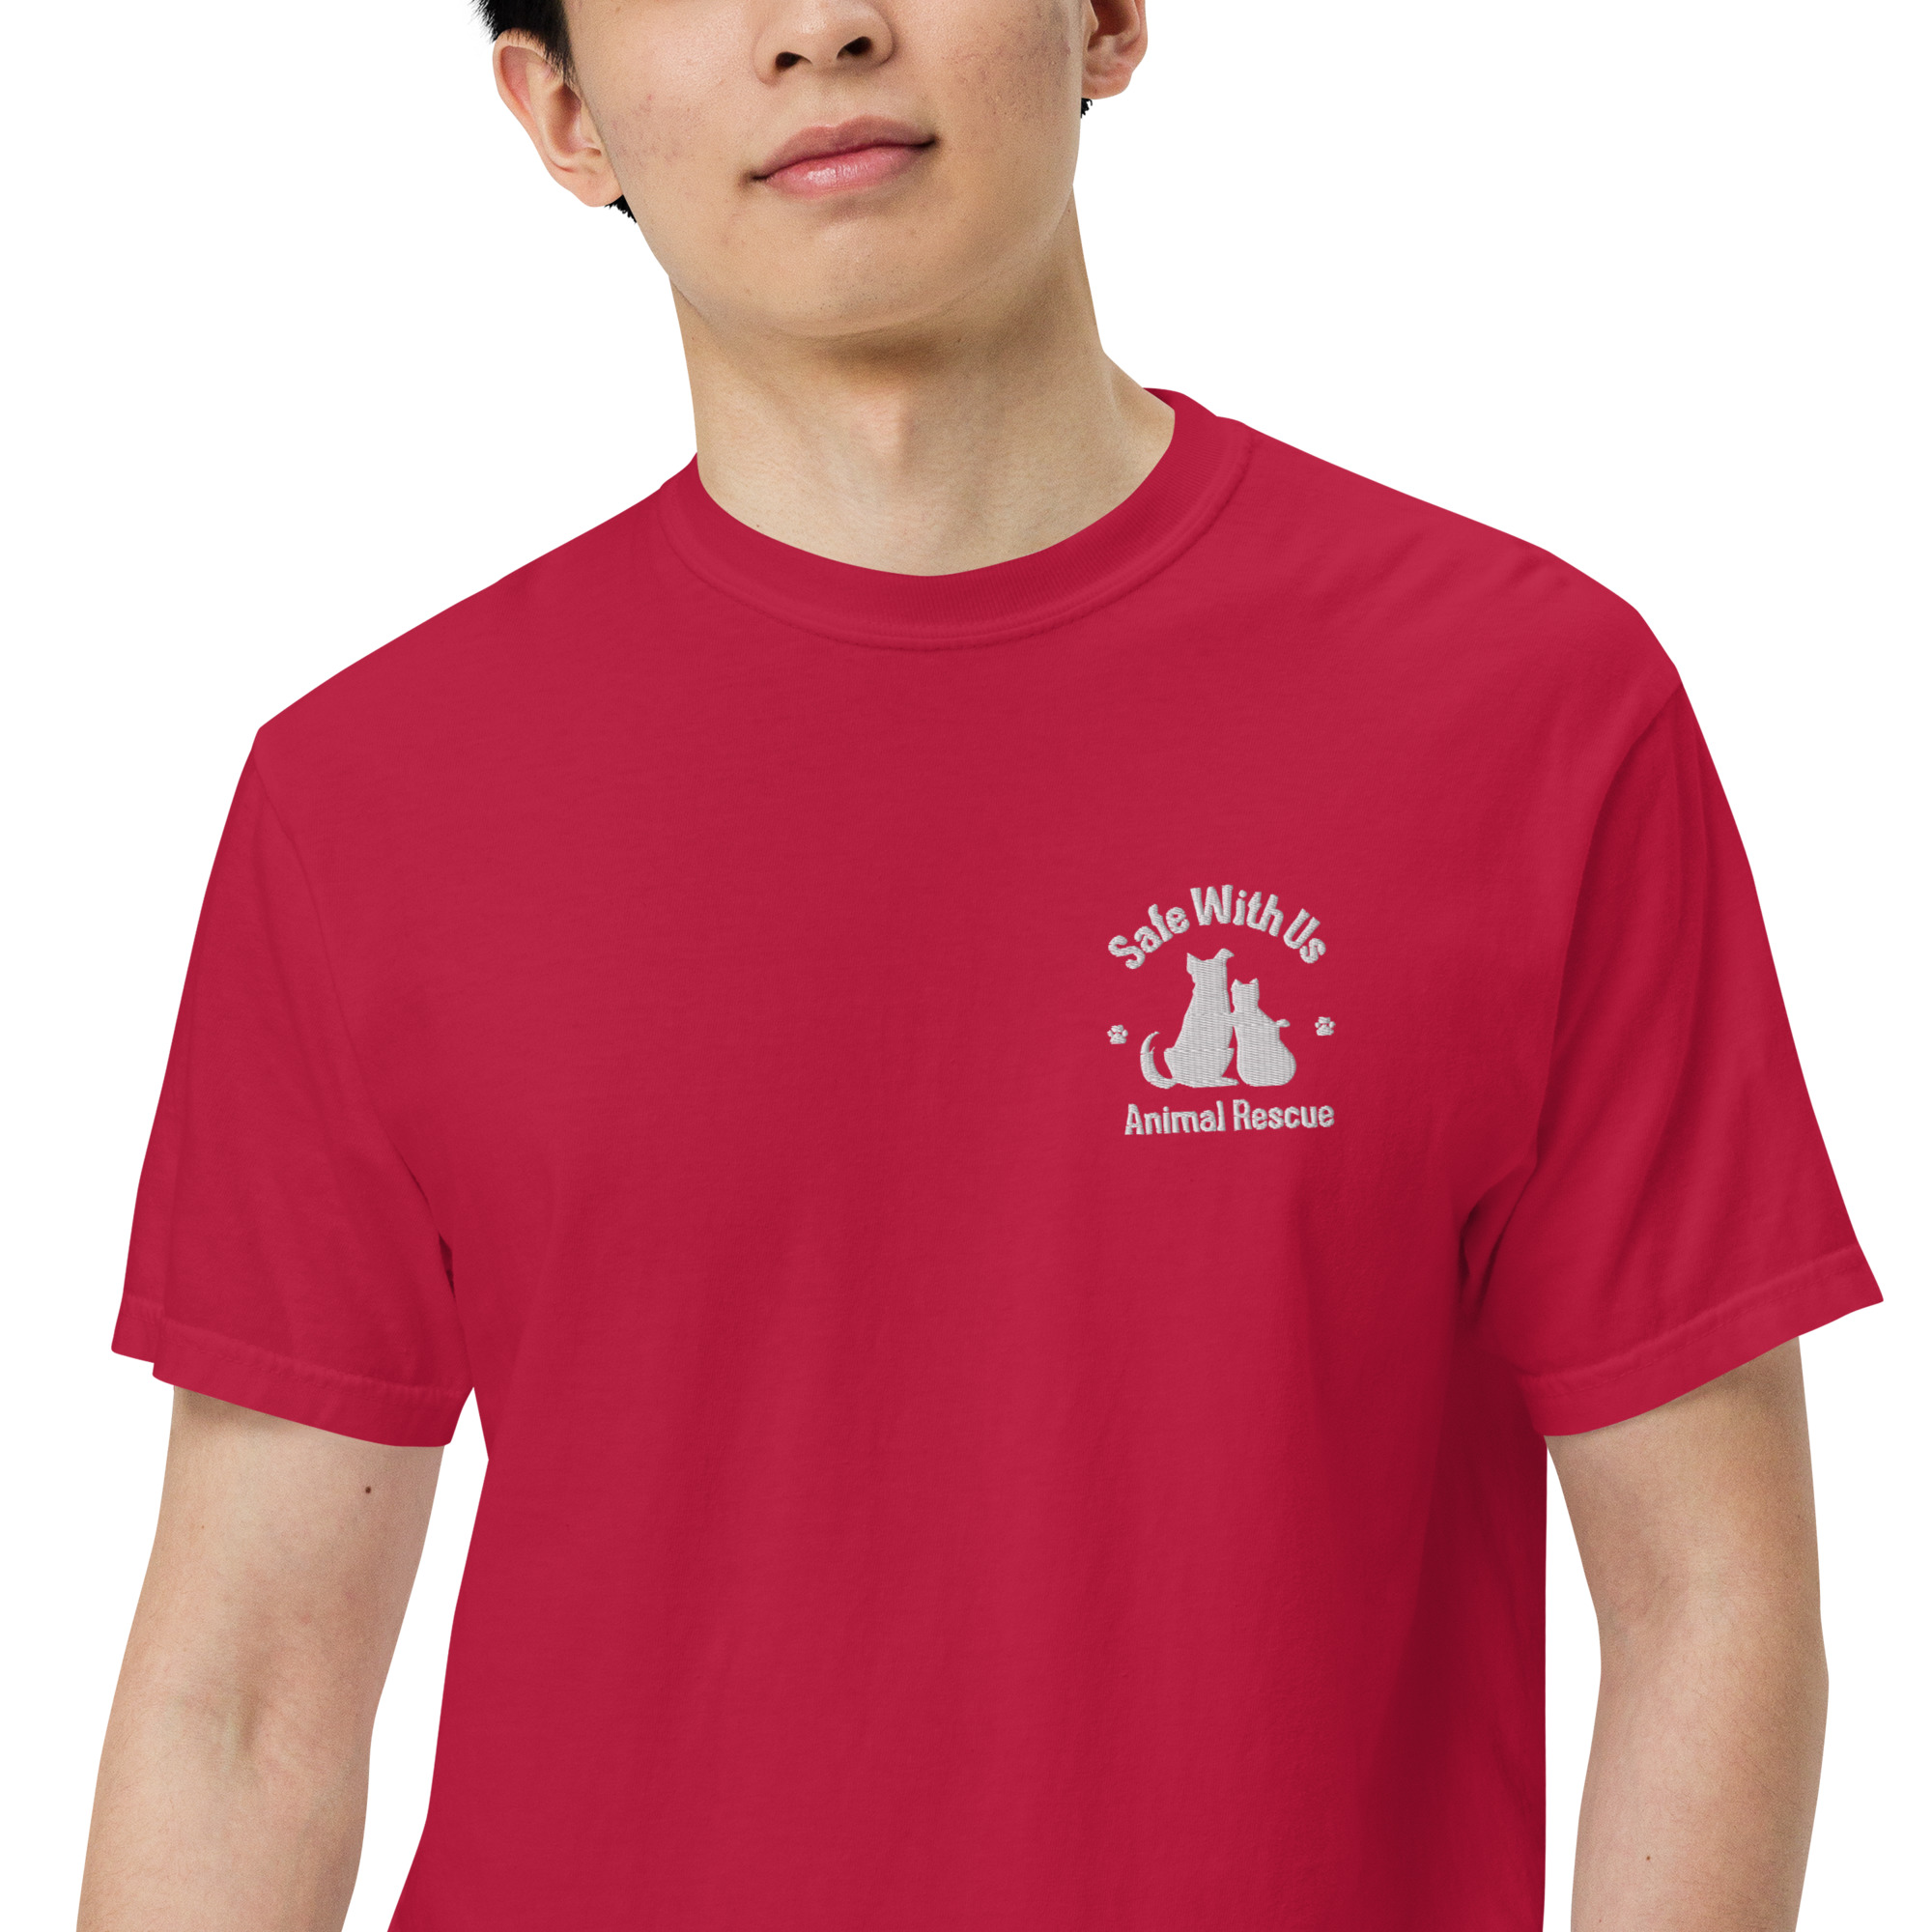 mens-garment-dyed-heavyweight-t-shirt-red-zoomed-in-2-6415fedc24db3.jpg